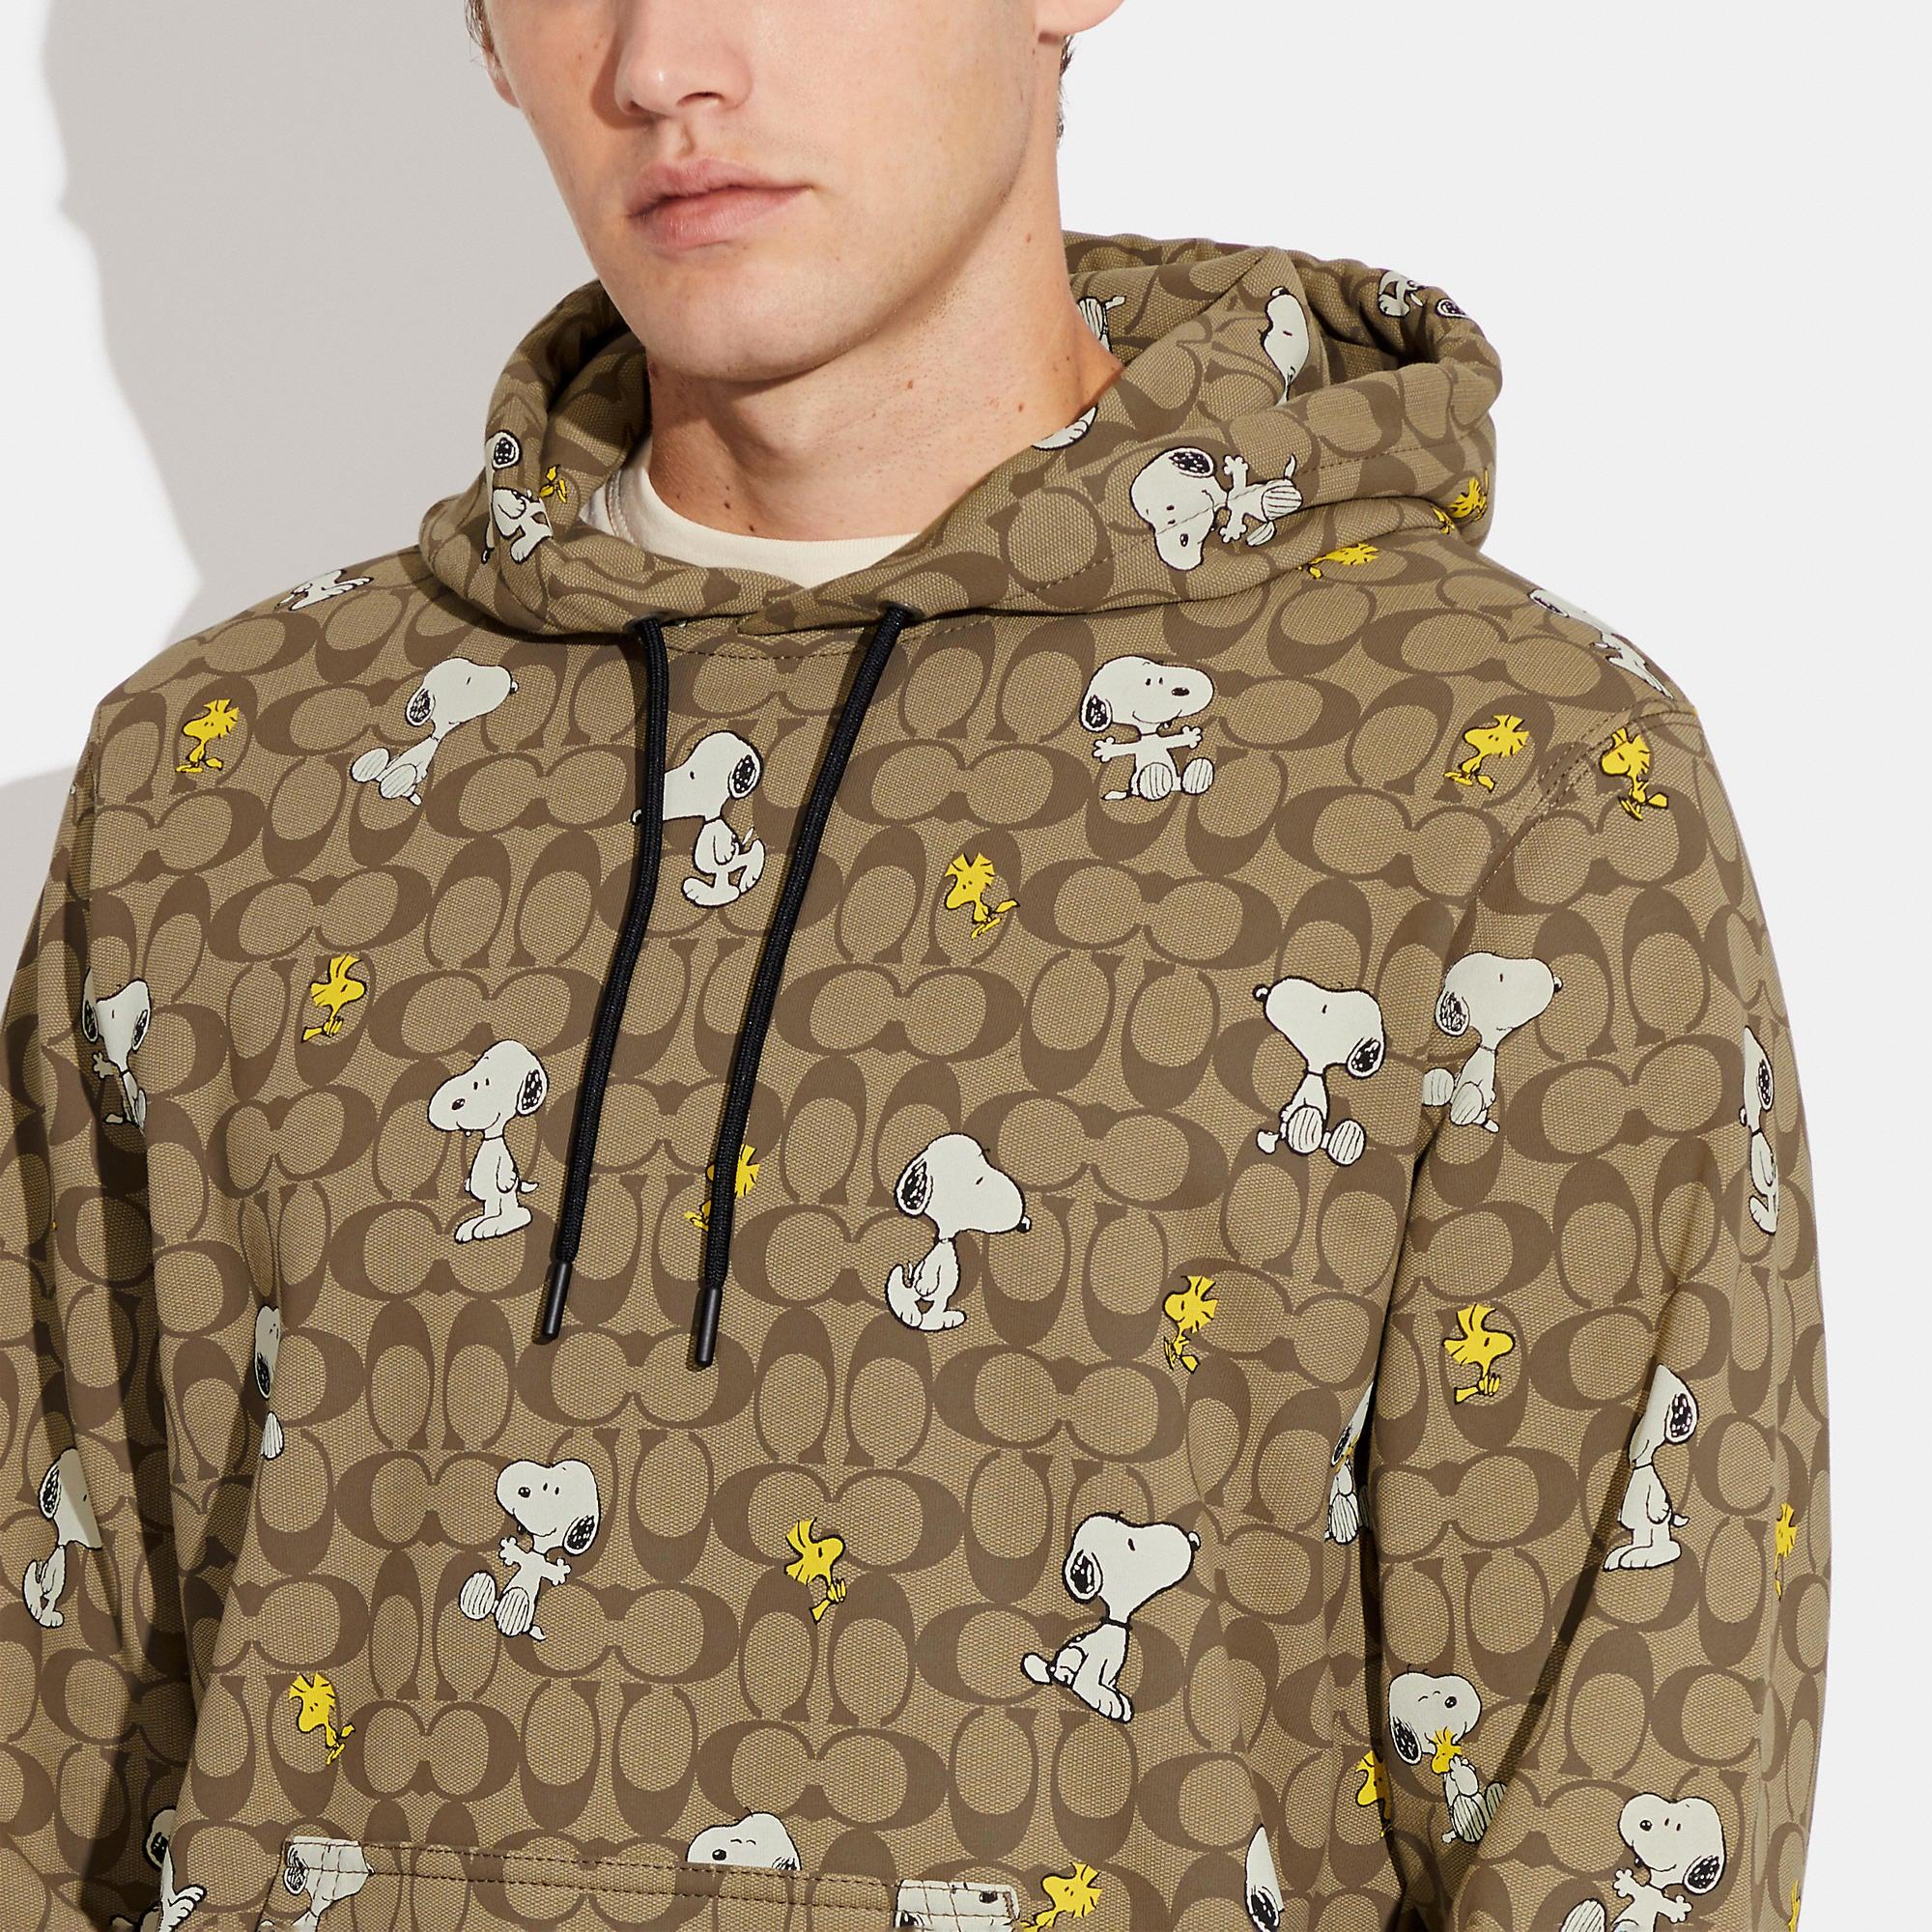 Coach Outlet Coach X Peanuts Signature Snoopy Hoodie in Green for